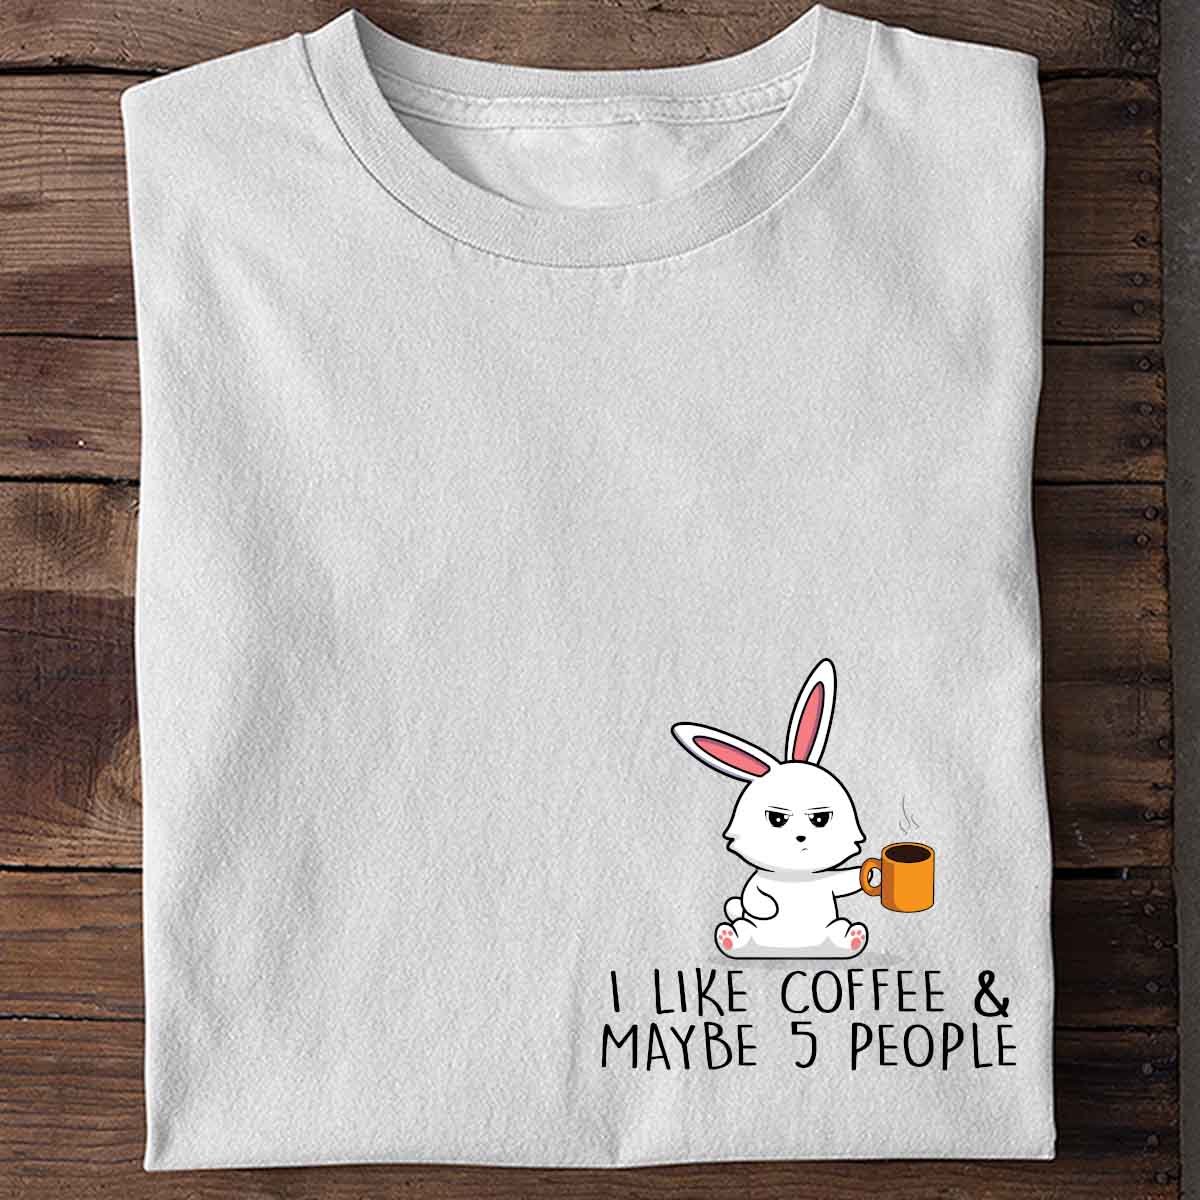 5 People Cute Bunny - Shirt Unisex Chest